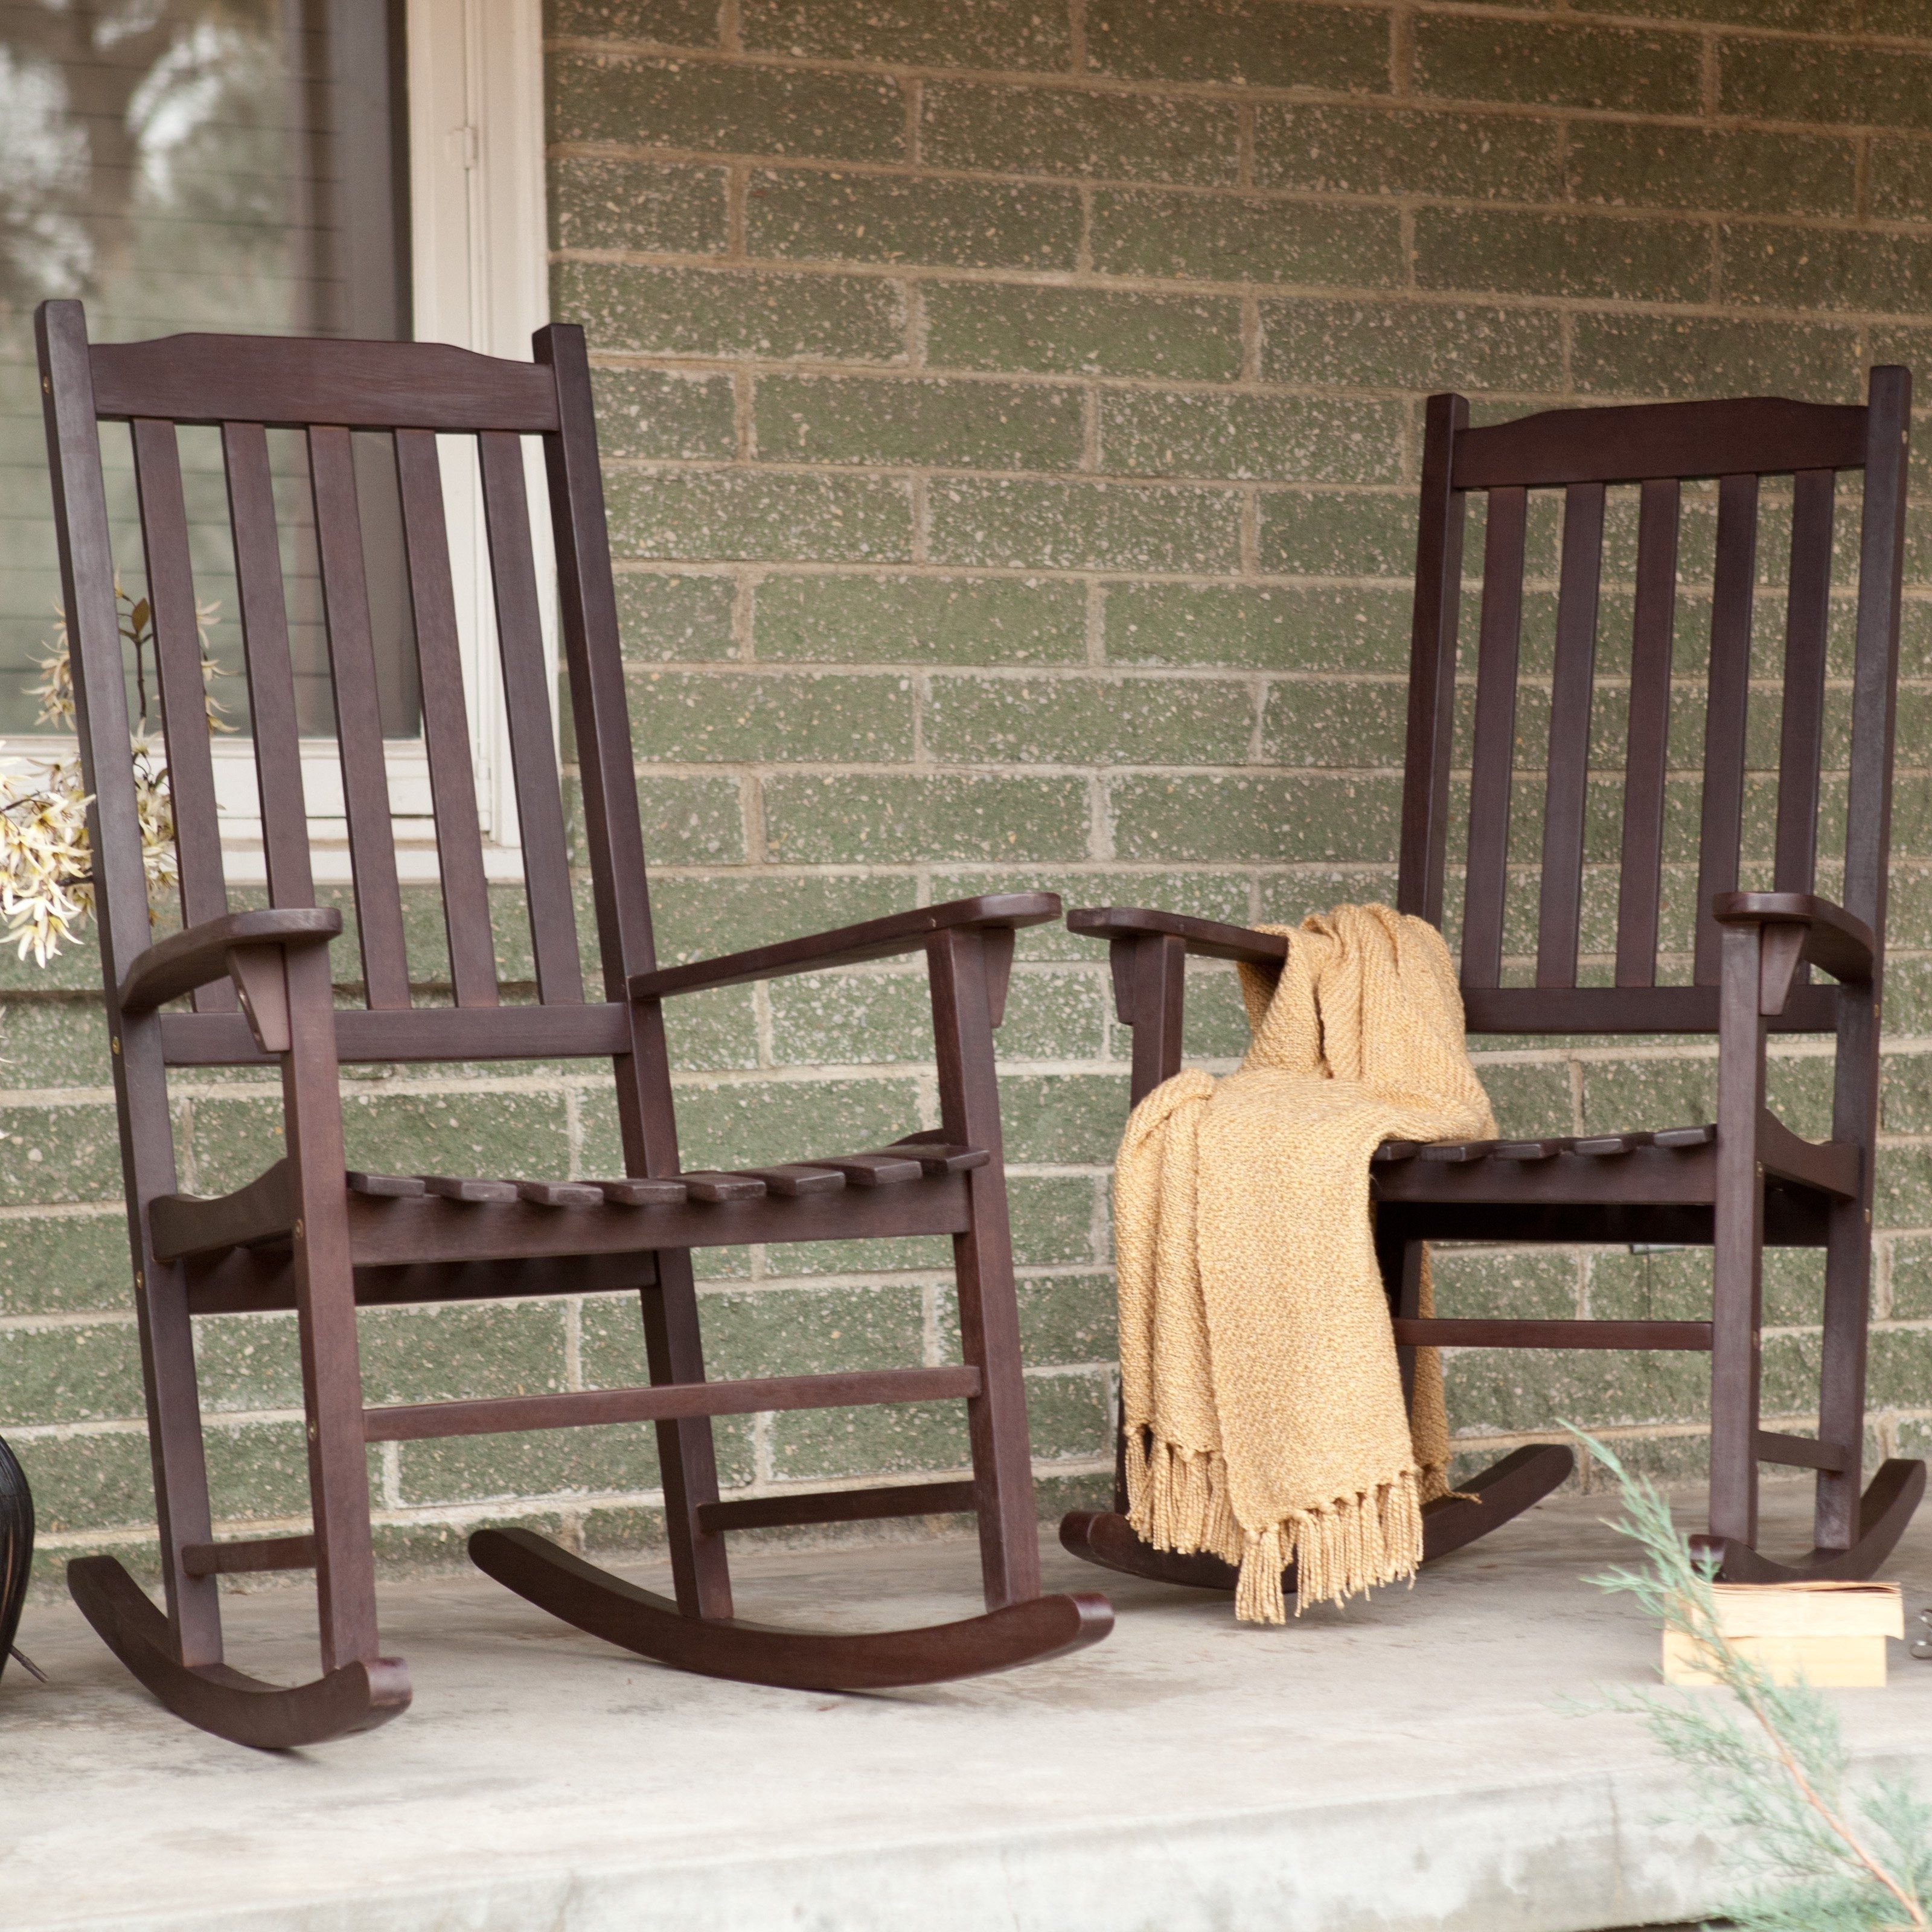 Newest Garden & Patio Furniture : Wooden Indoor Rocking Chairs Antique For Old Fashioned Rocking Chairs (View 14 of 20)